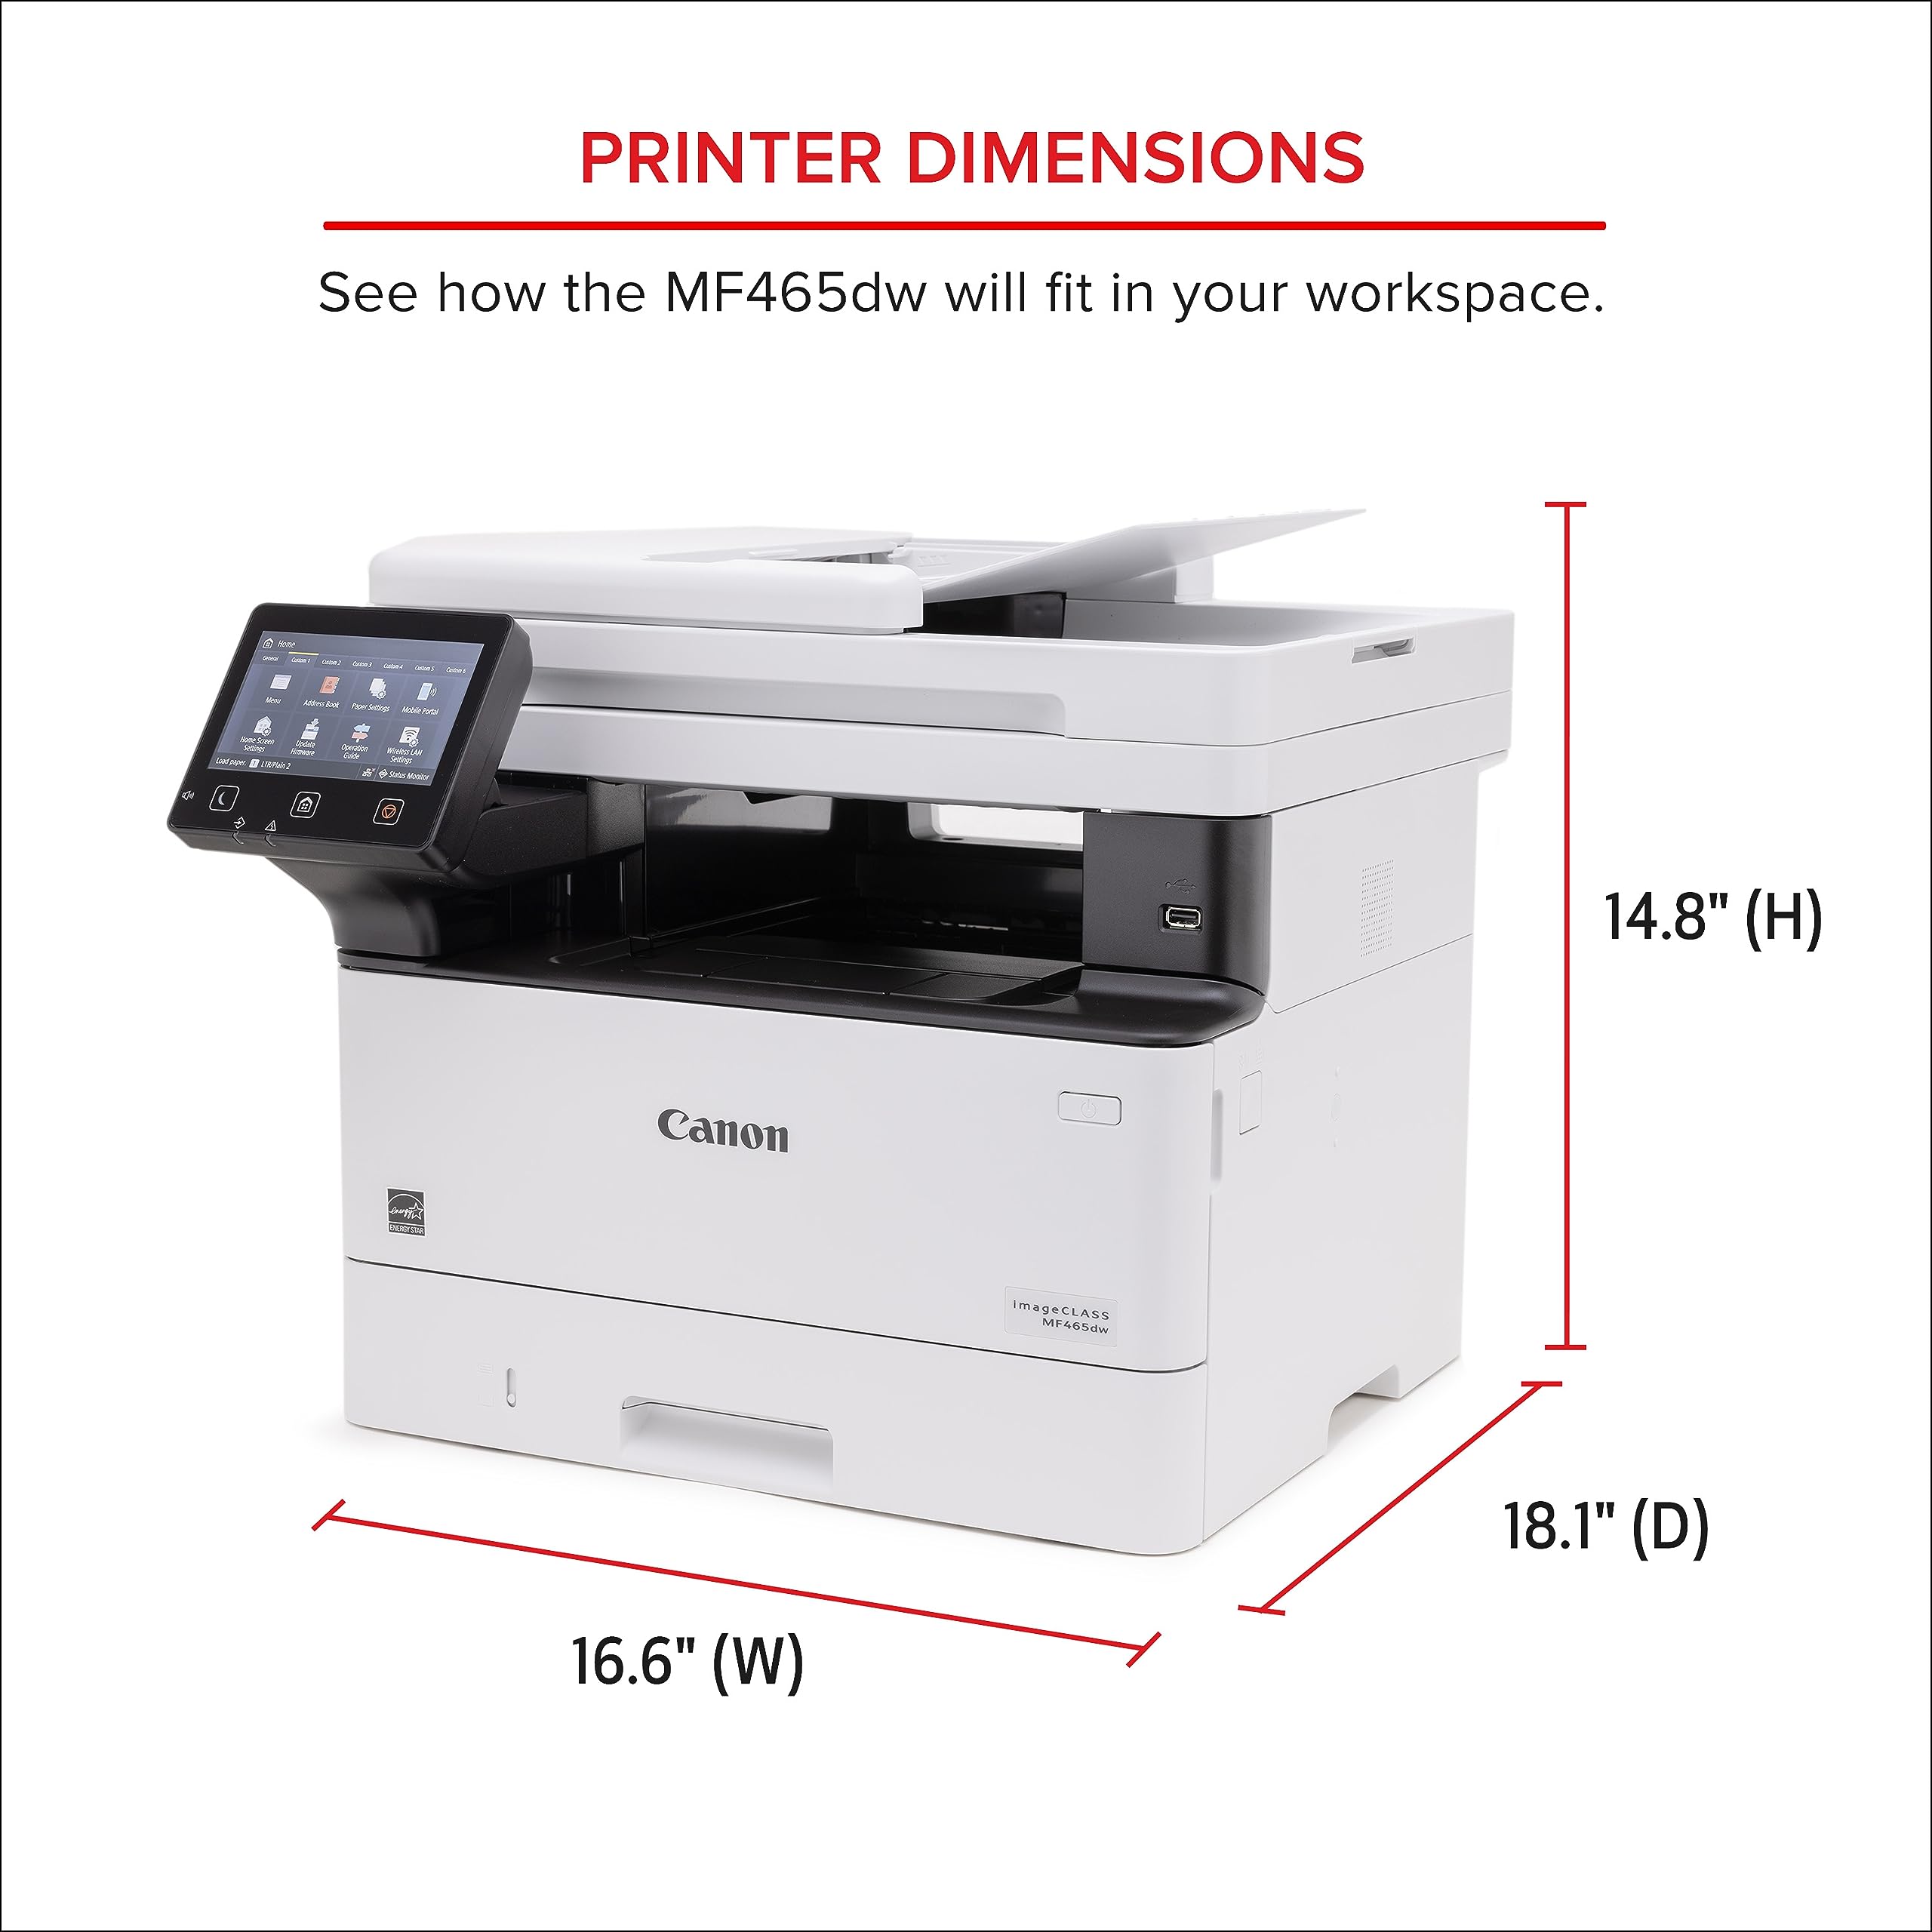 Canon imageCLASS MF465dw - All in One, Wireless, Mobile Ready, Duplex Laser Printer with Expandable Paper Capacity and 3 Year Limited Warranty,White